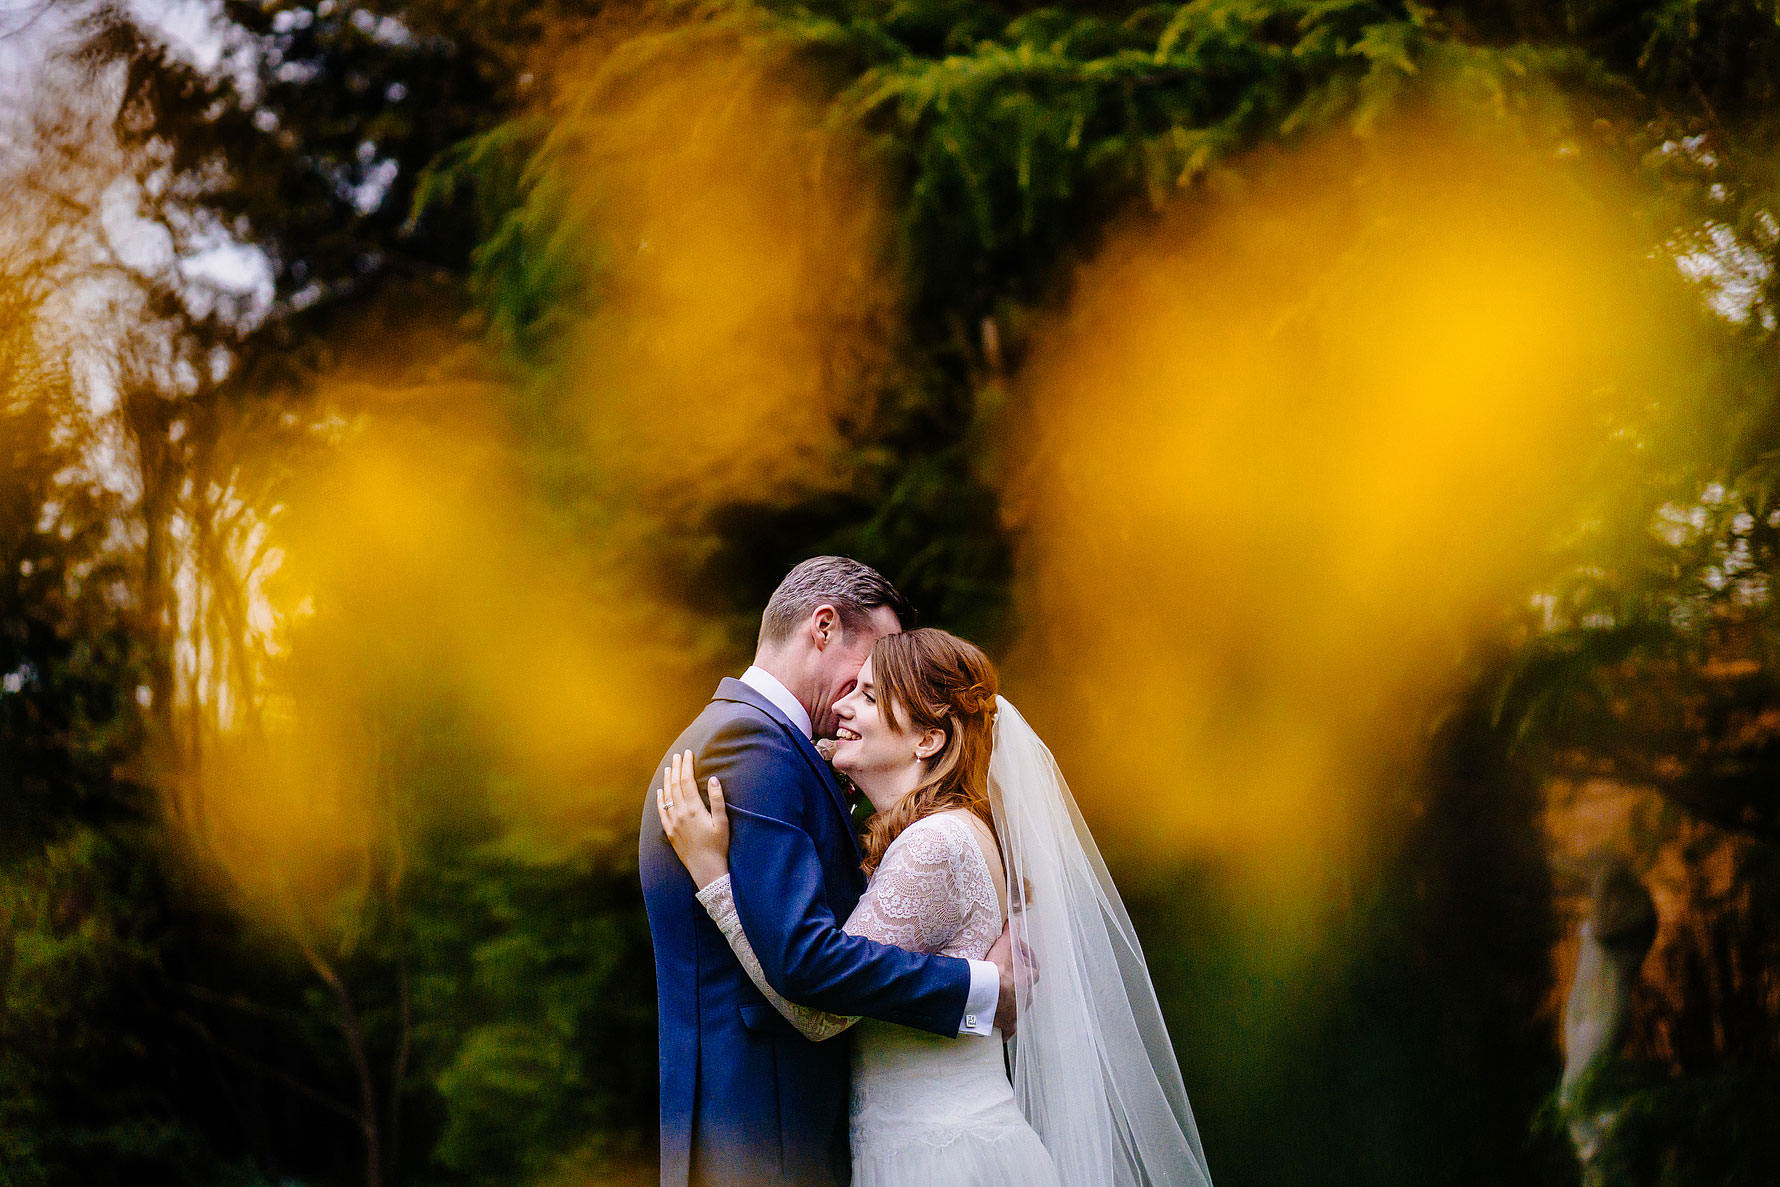 a colourful image of a bride and groom